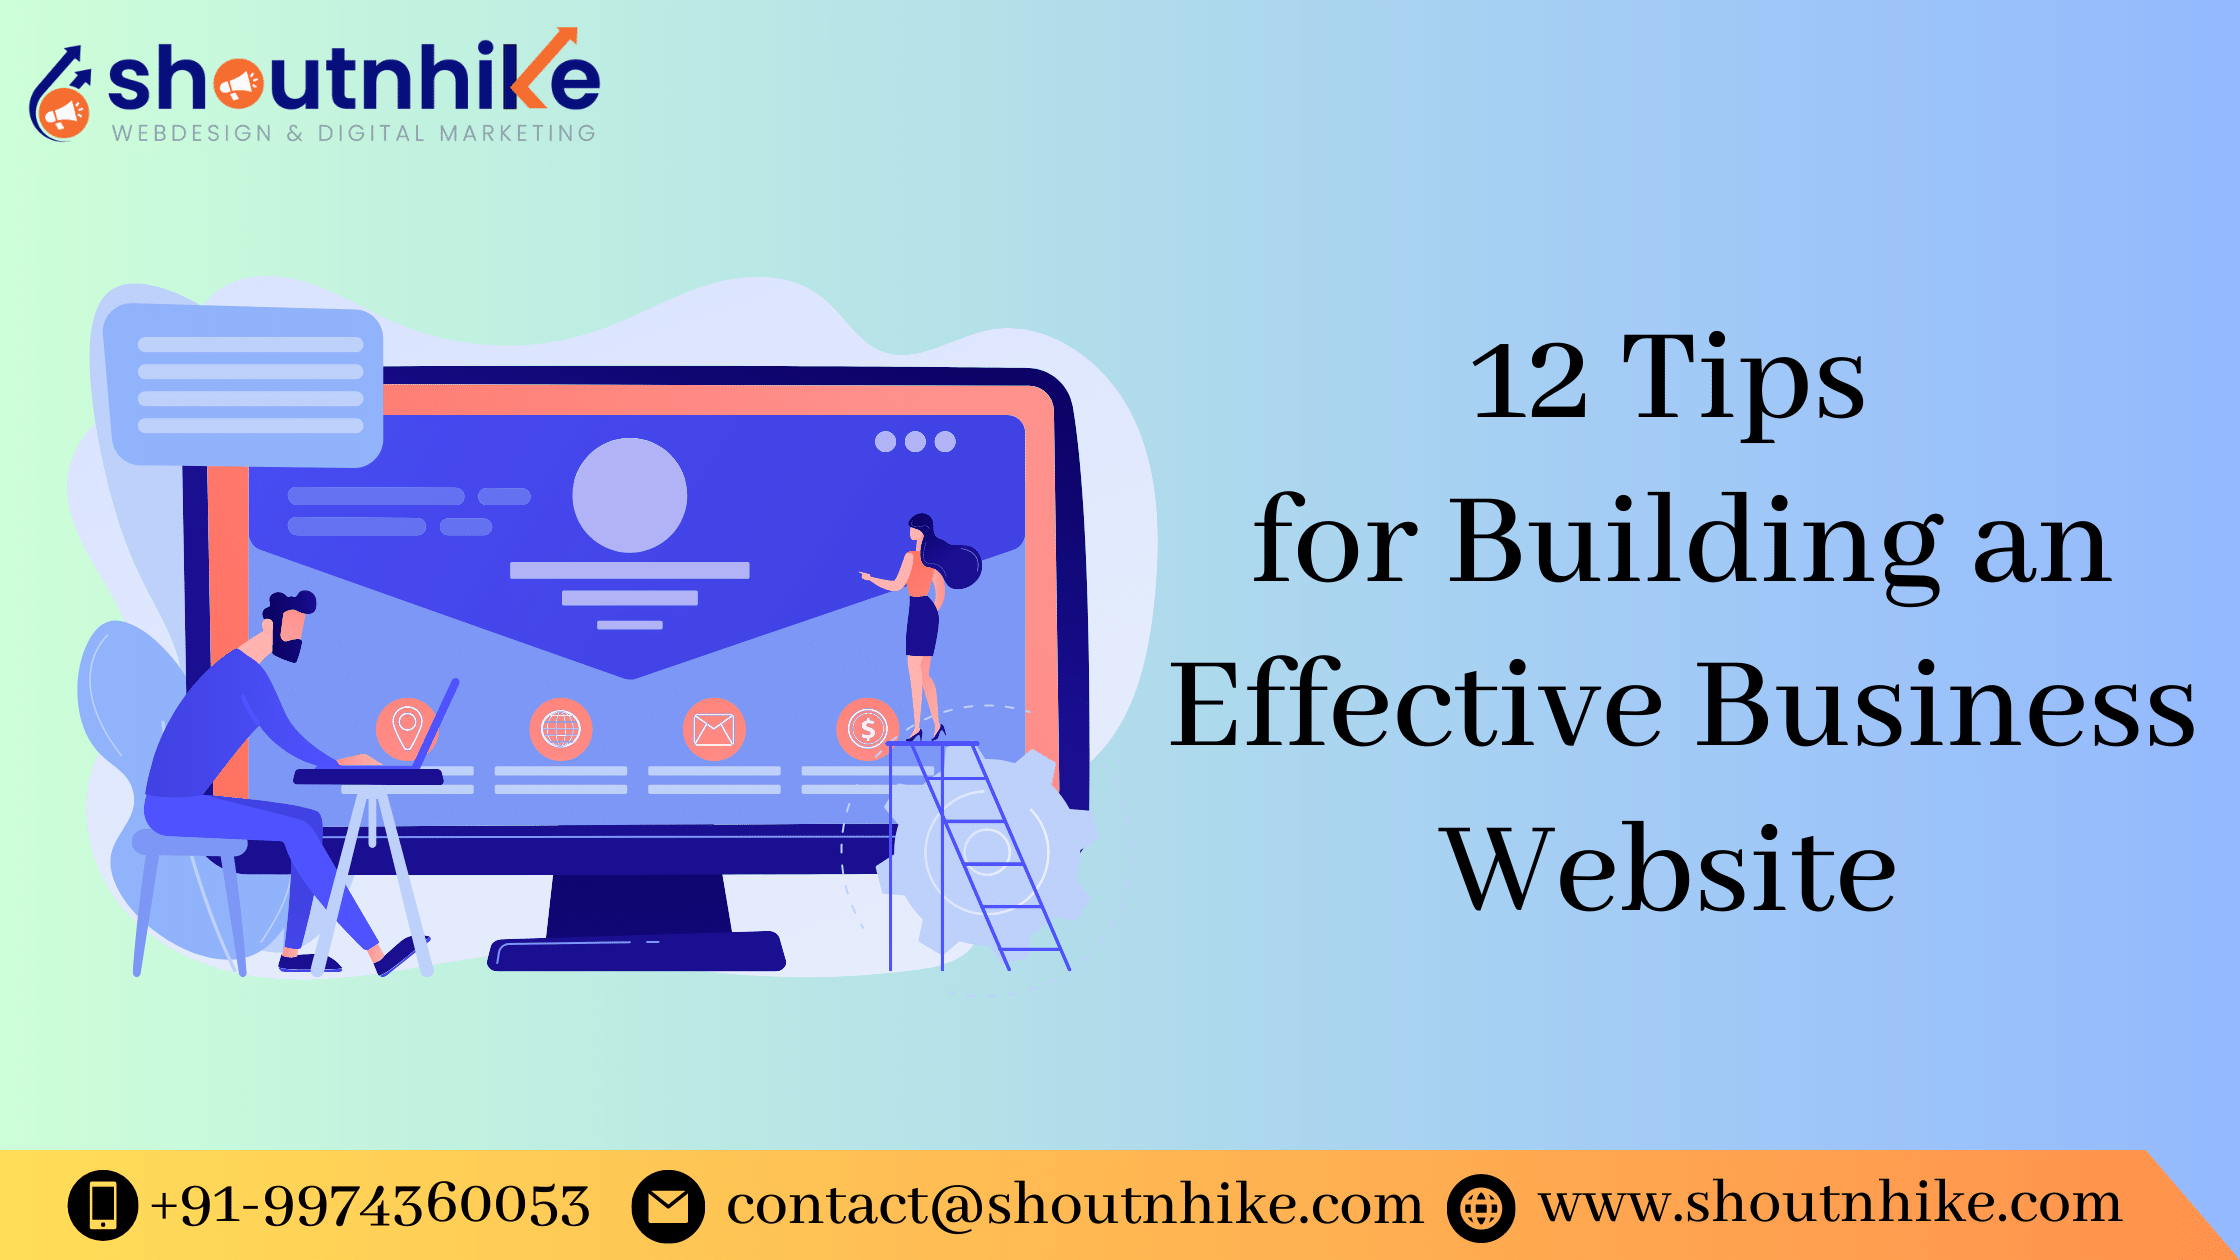 12 Tips for Building an Effective Business Website